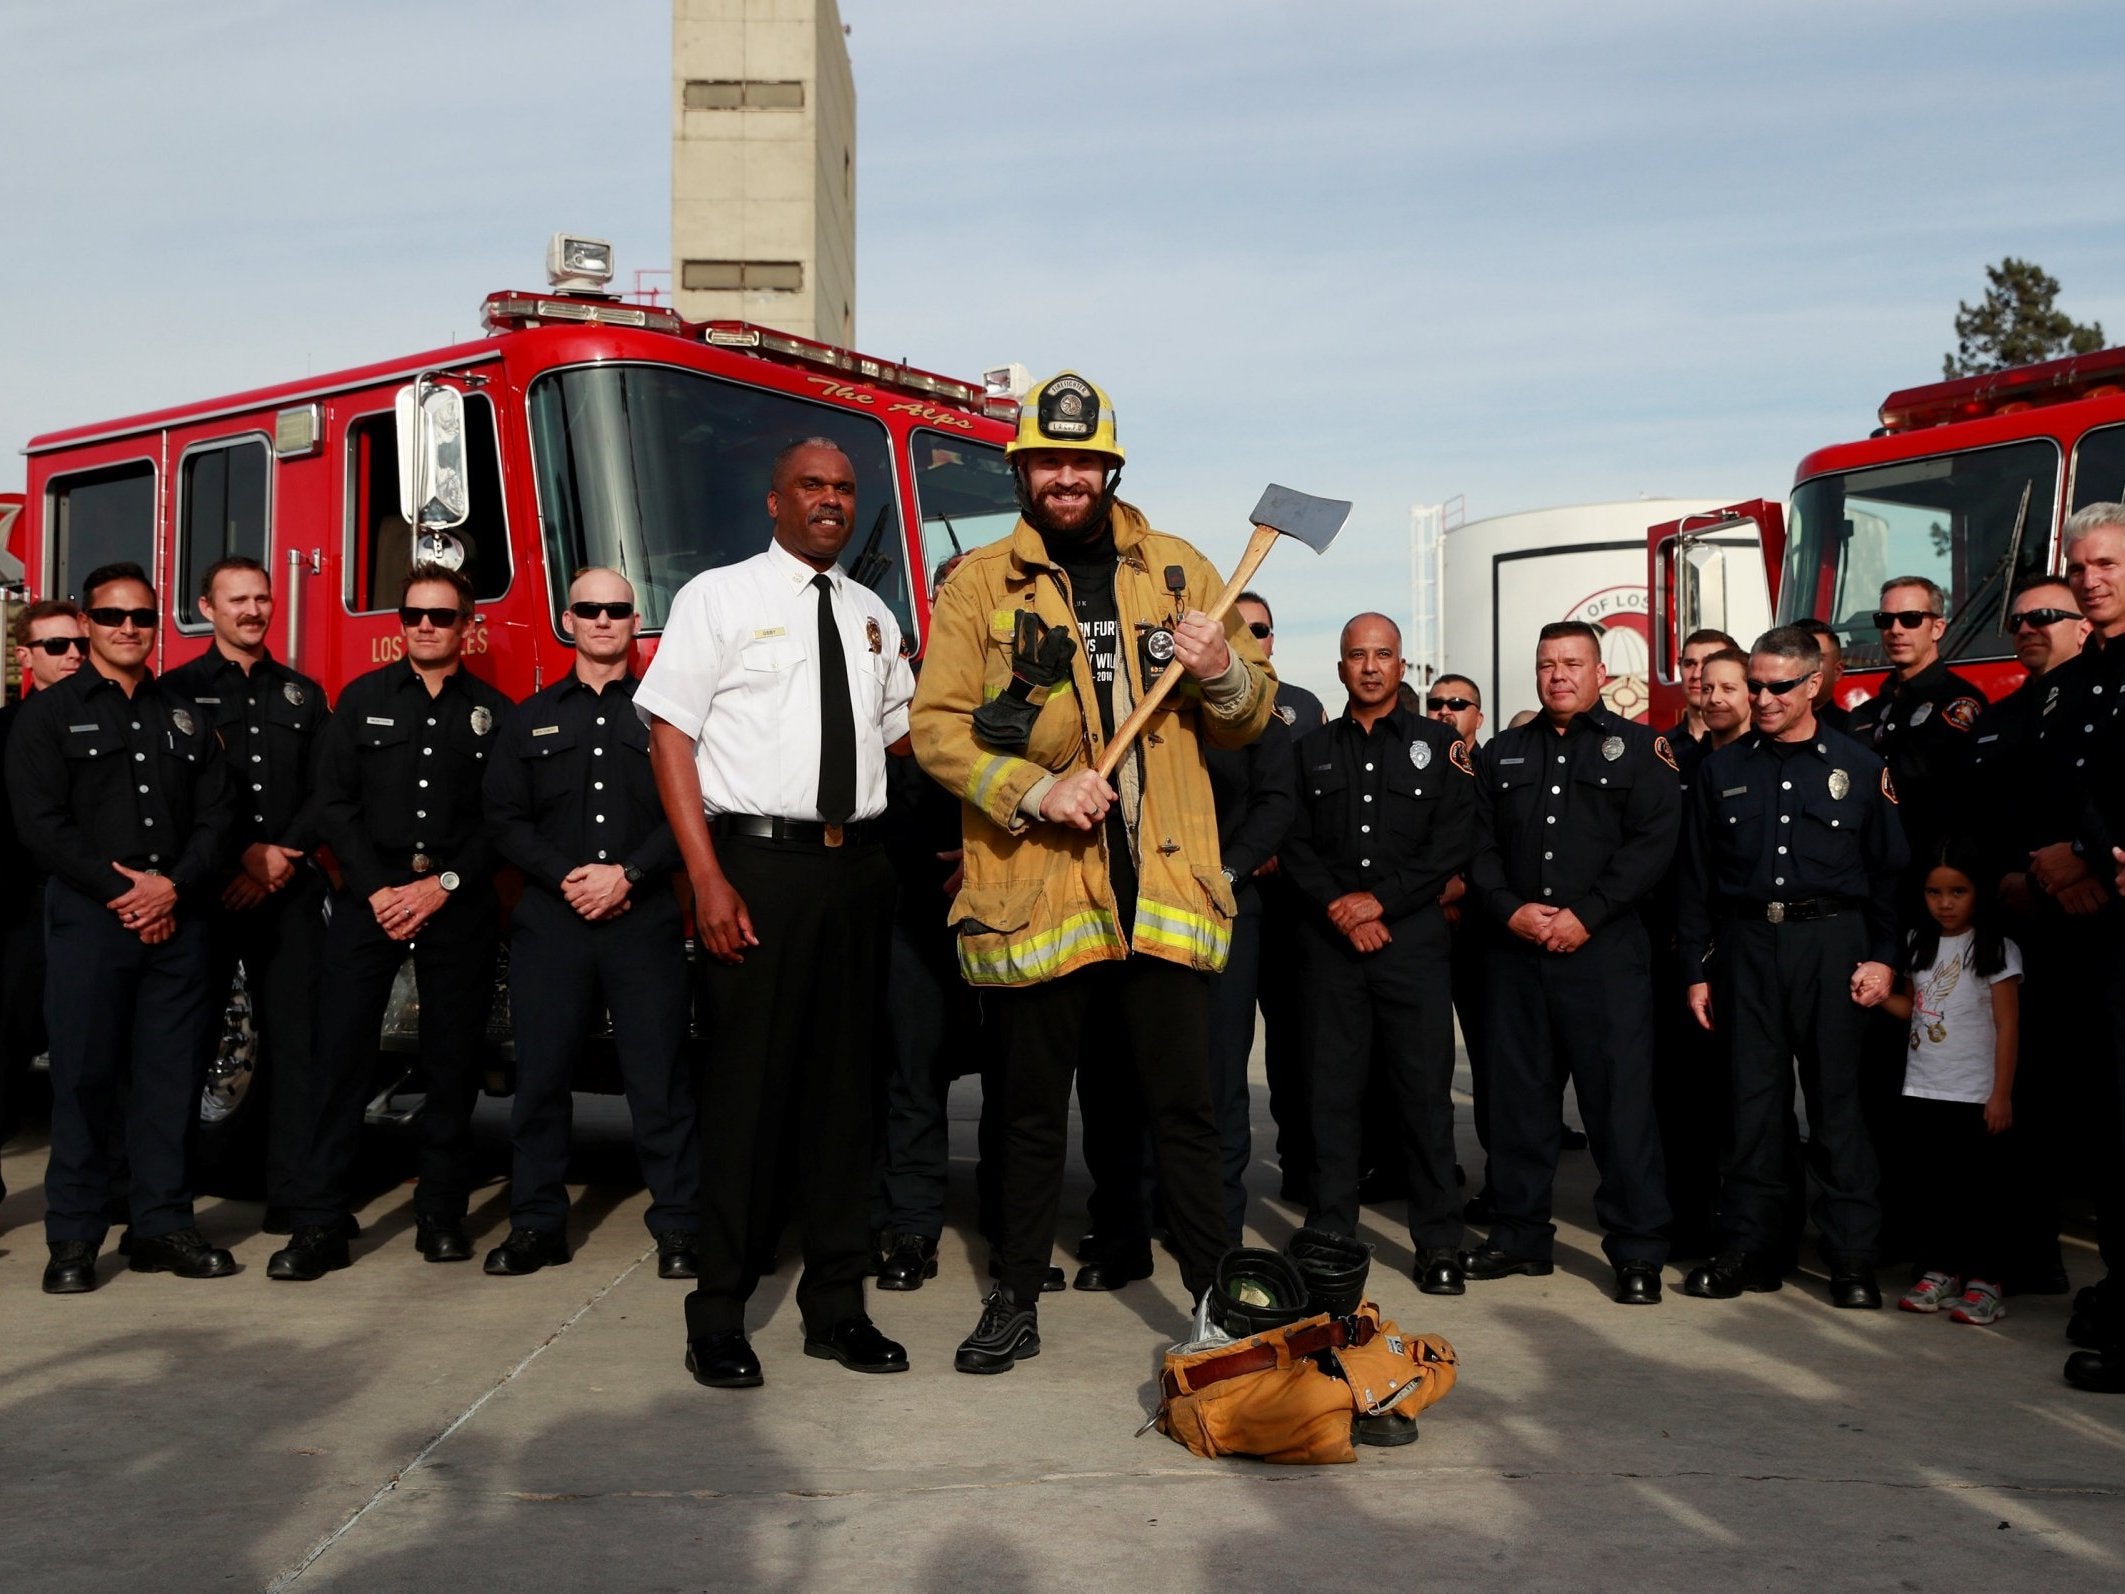 Fury presented tickets to a group of LA firefighters